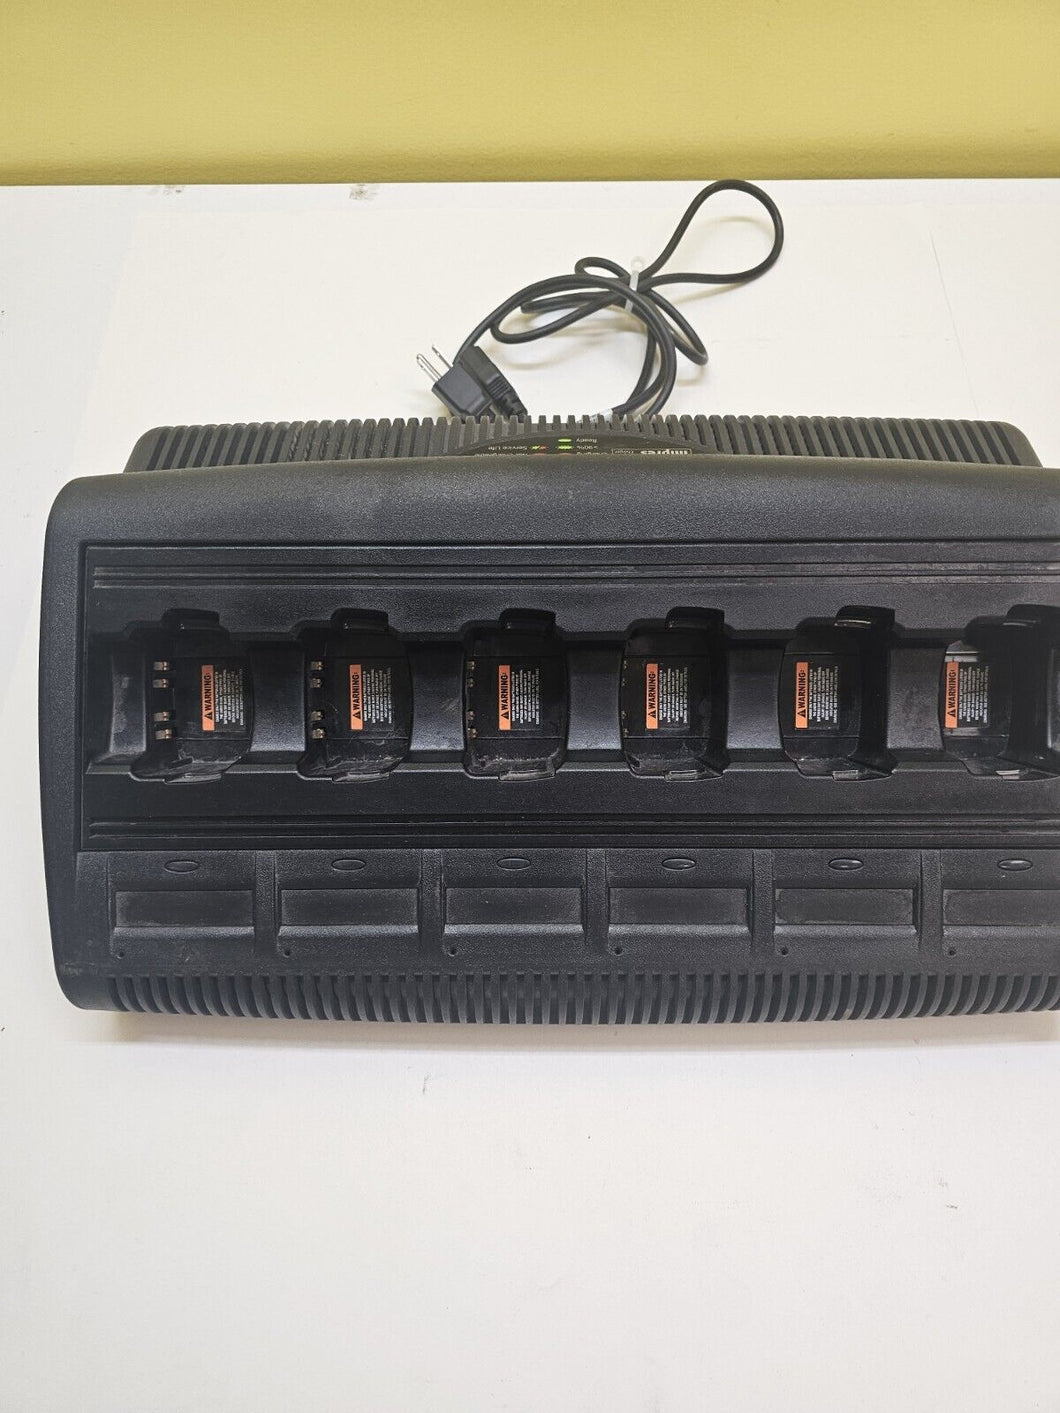 Motorola WPLN4197A Impres Six Bank Charger for HT750 HT1250 PR860 Two Way Radios